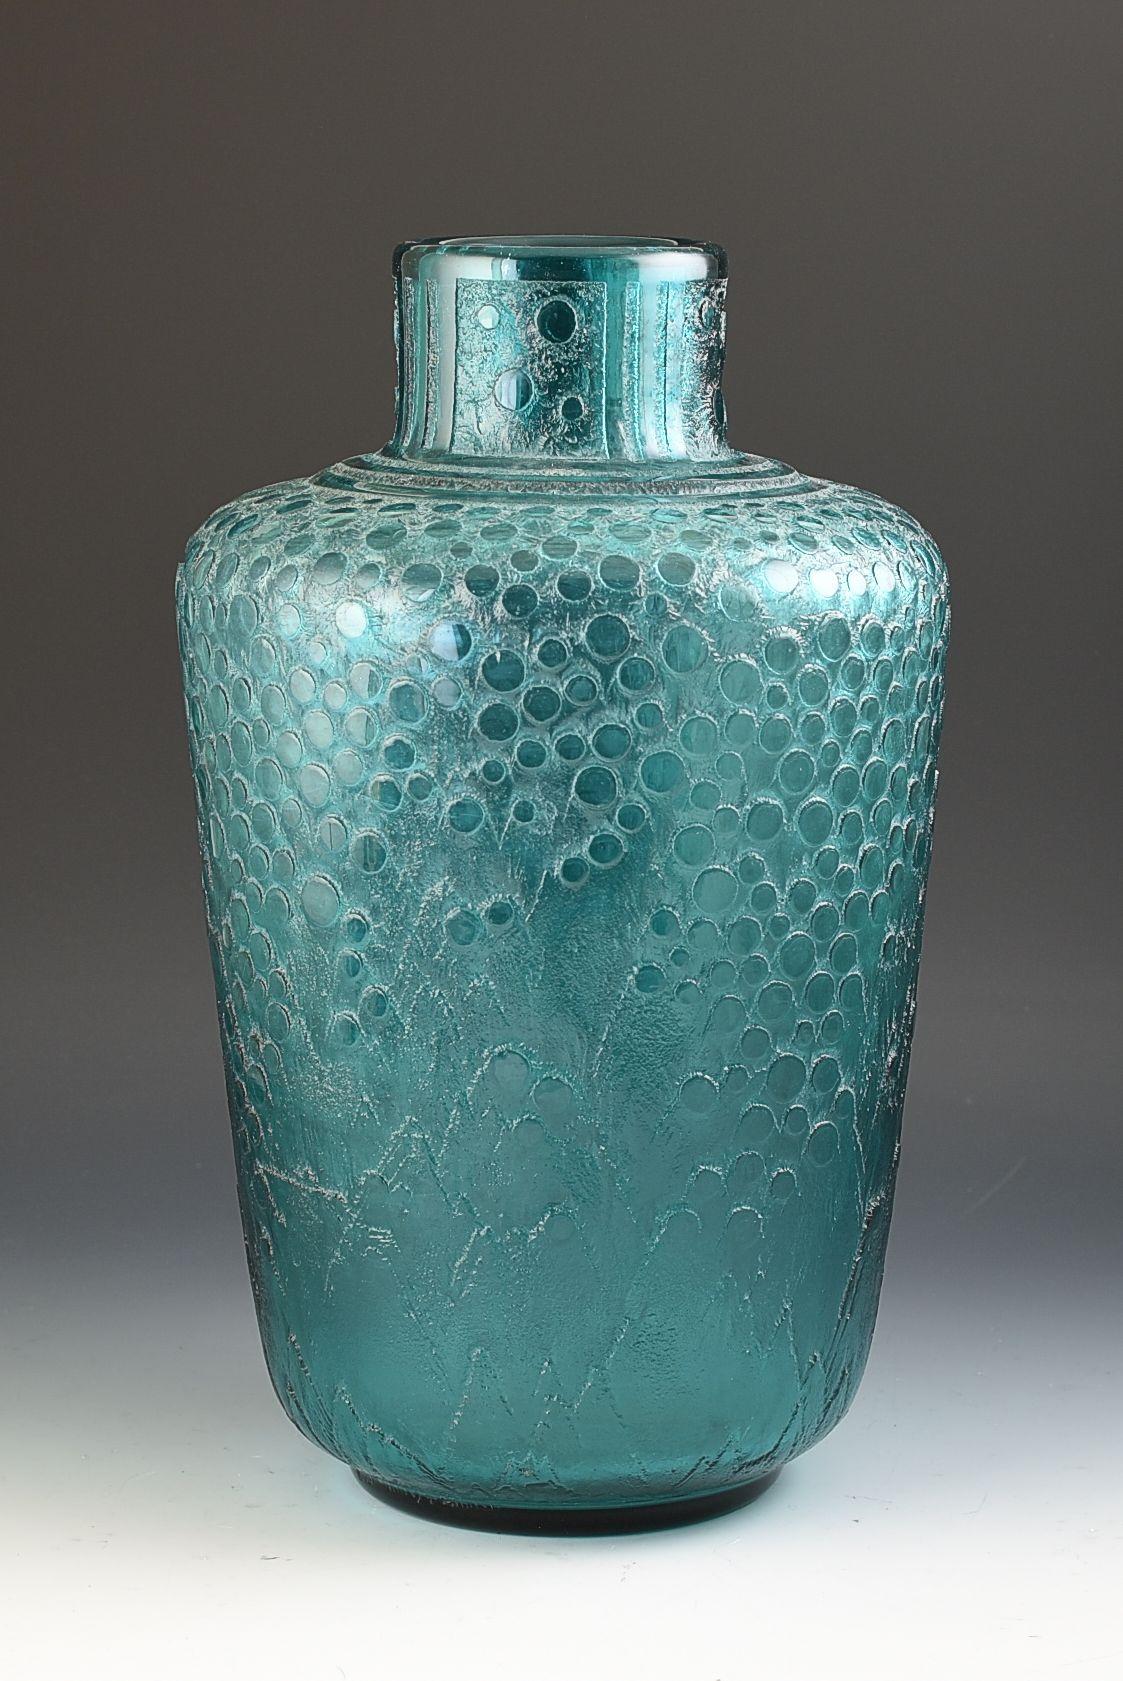 A large and impressive Art deco acid etched vase decorated with polished bubbles against an icy or watery finish on a Teal Blue ground, it also gives off a sea green colour depending on lighting! . This Daum Nancy vase will date to 1930 and is in